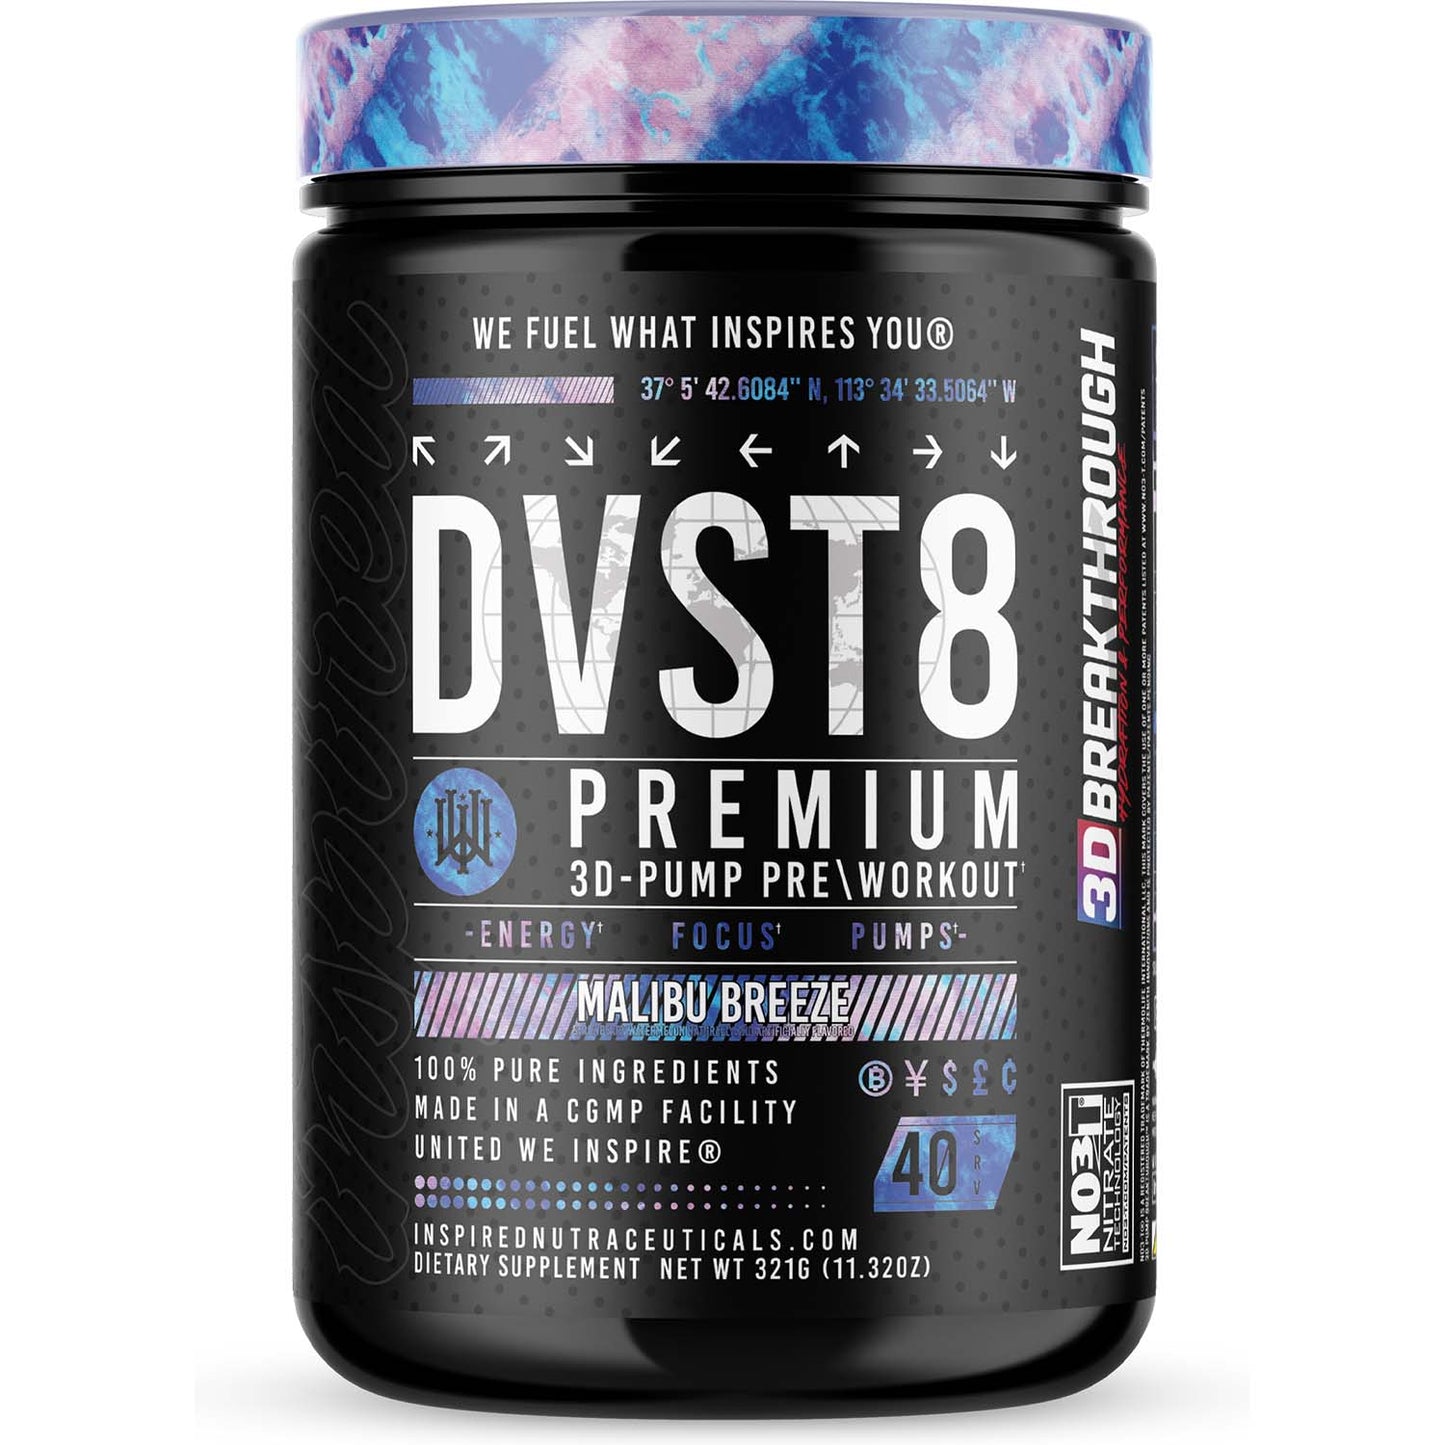 Inspired Nutraceuticals DVST8 Global Pre-Workout 40 Servings